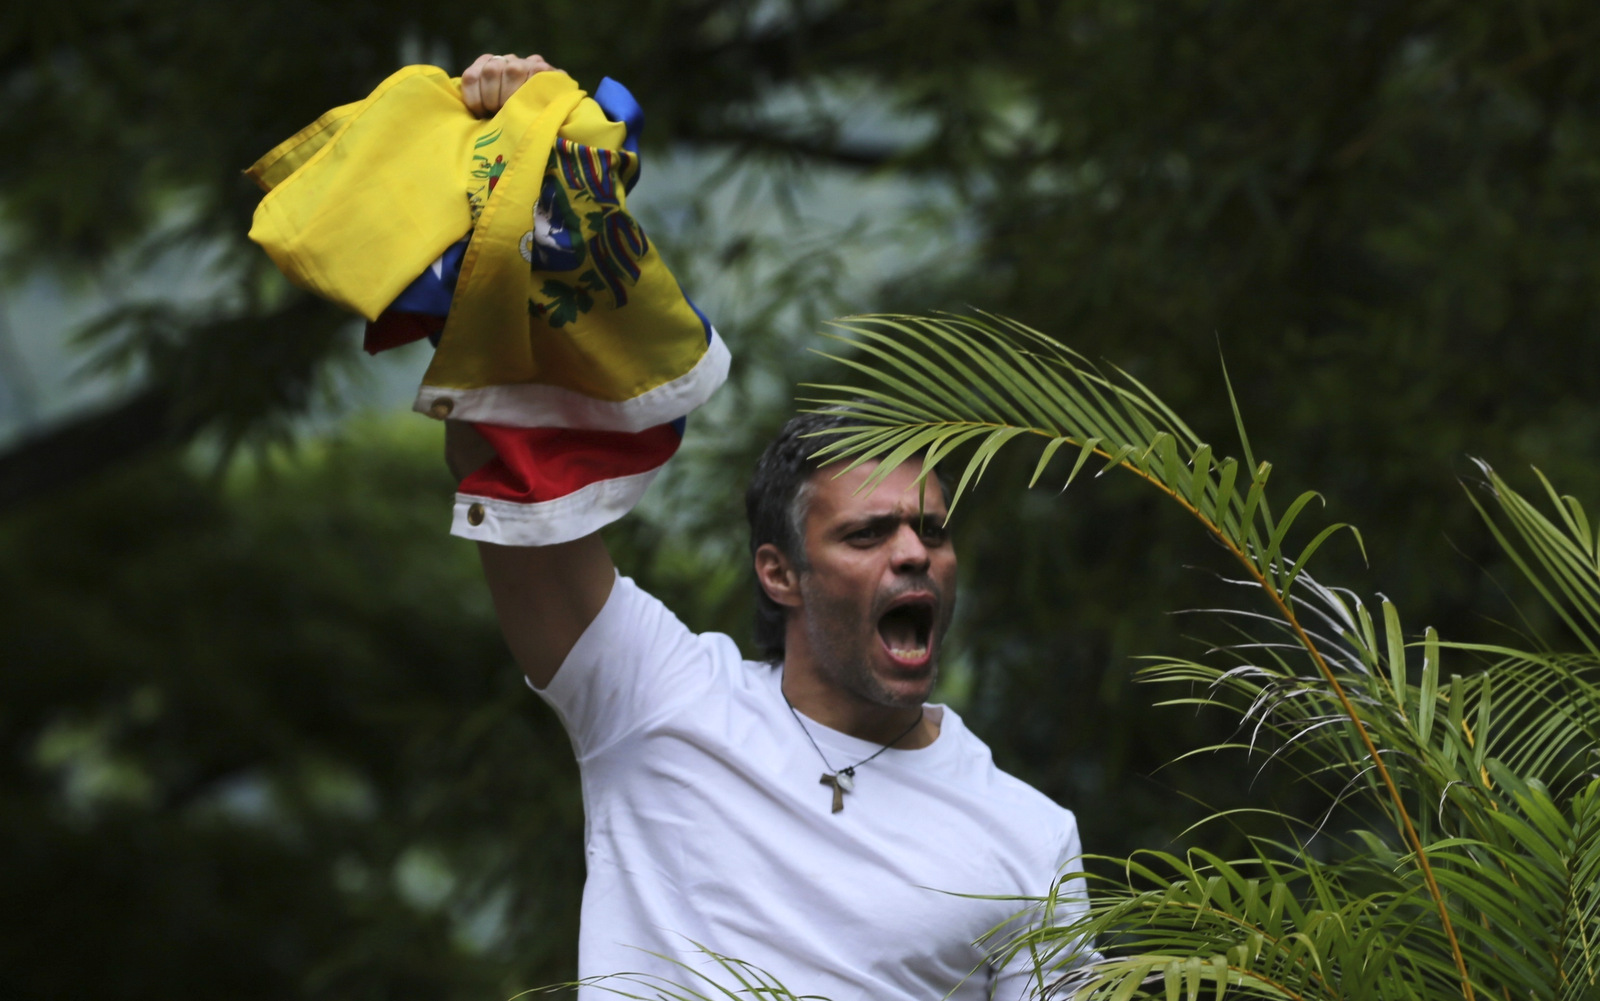 Opposition leader Leopoldo Lopez holds a Venezuelan national flag as he greets a group of opposition protesters outside his home in Caracas, Venezuela, July 8, 2017. (AP/Fernando Llano)